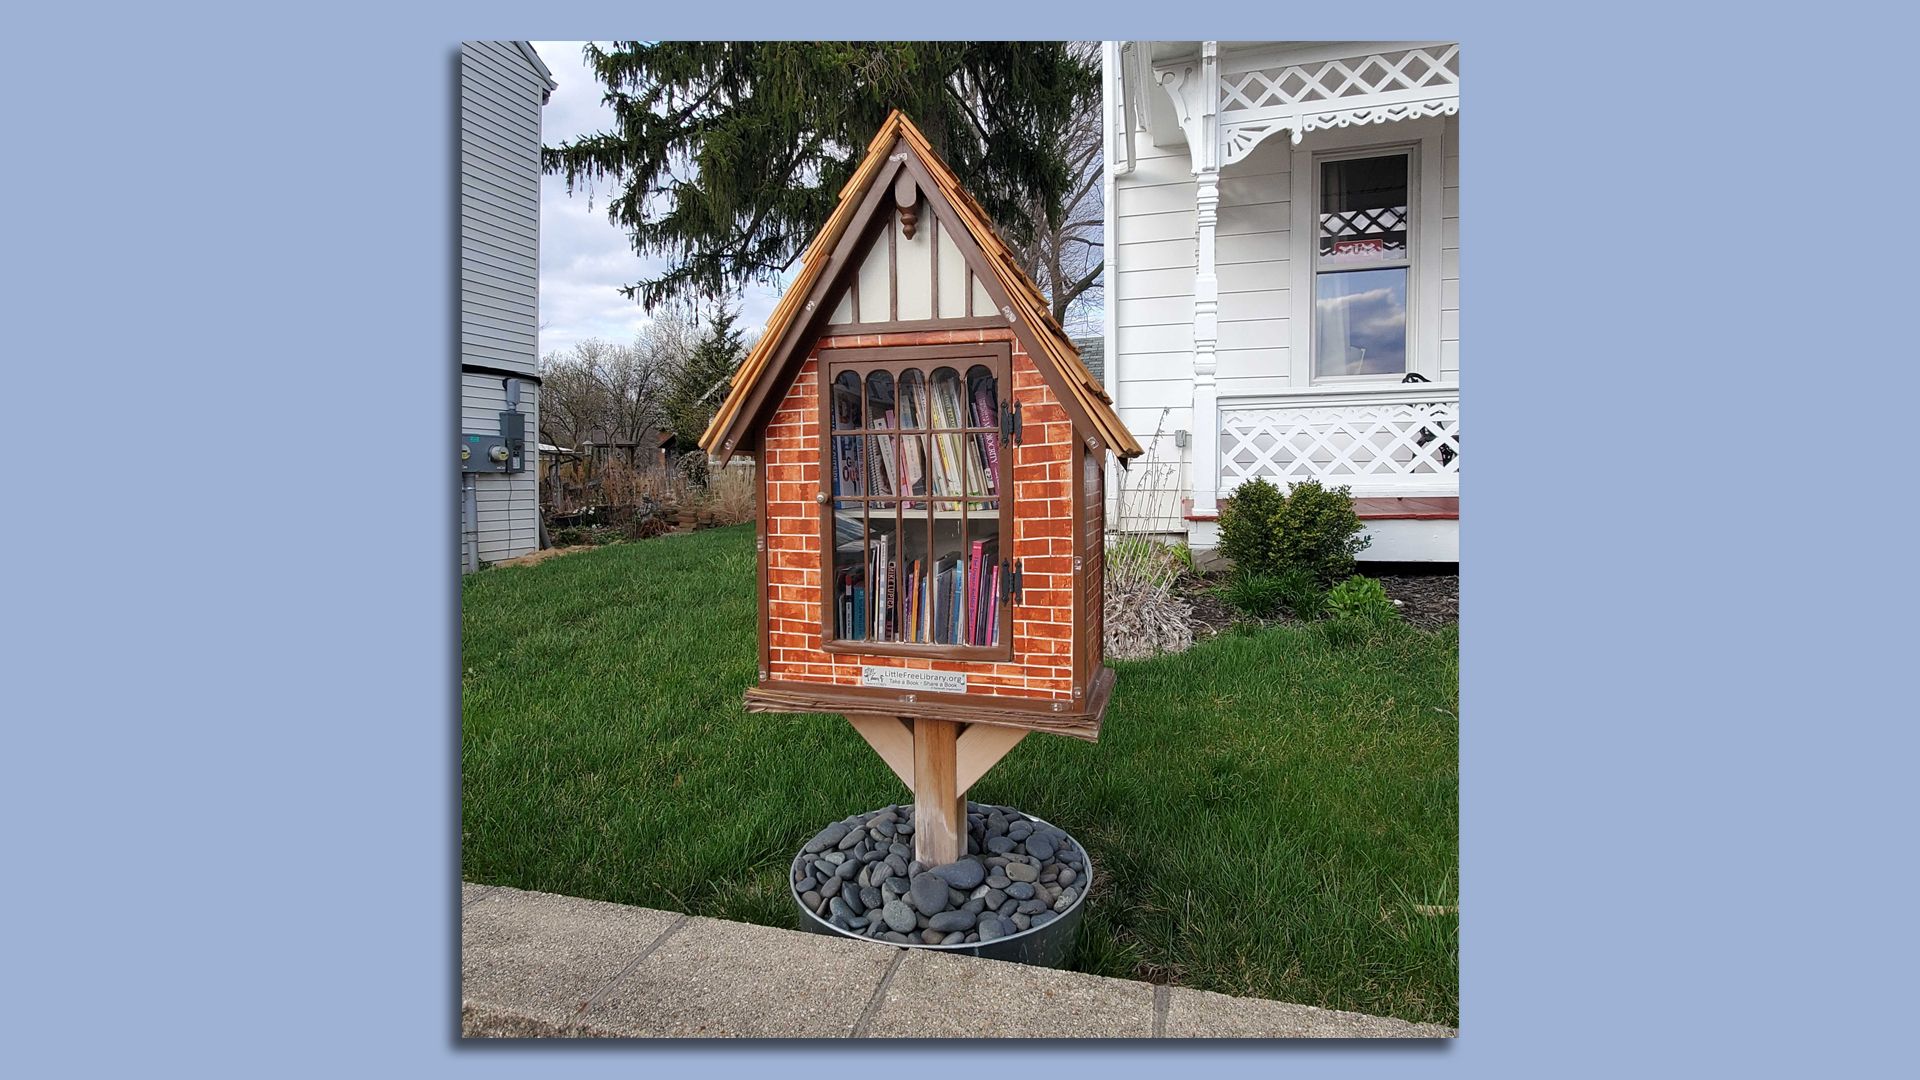 A "Little Free Library" in the shape of a miniature house next to a sidewalk.